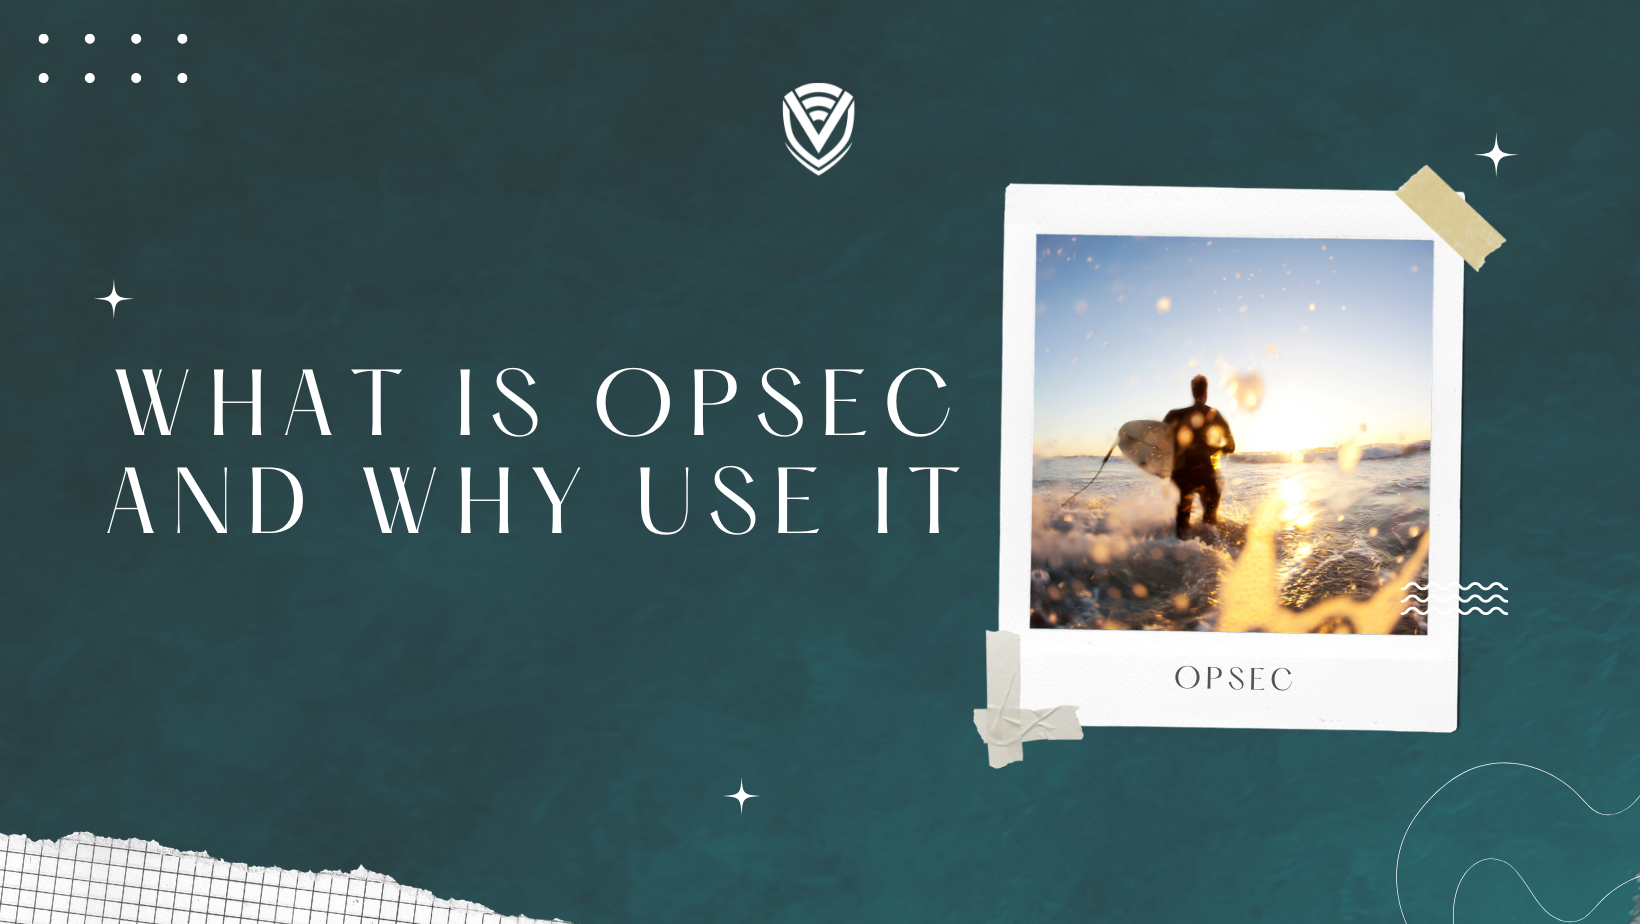 What is OpSec and why is it Useful?